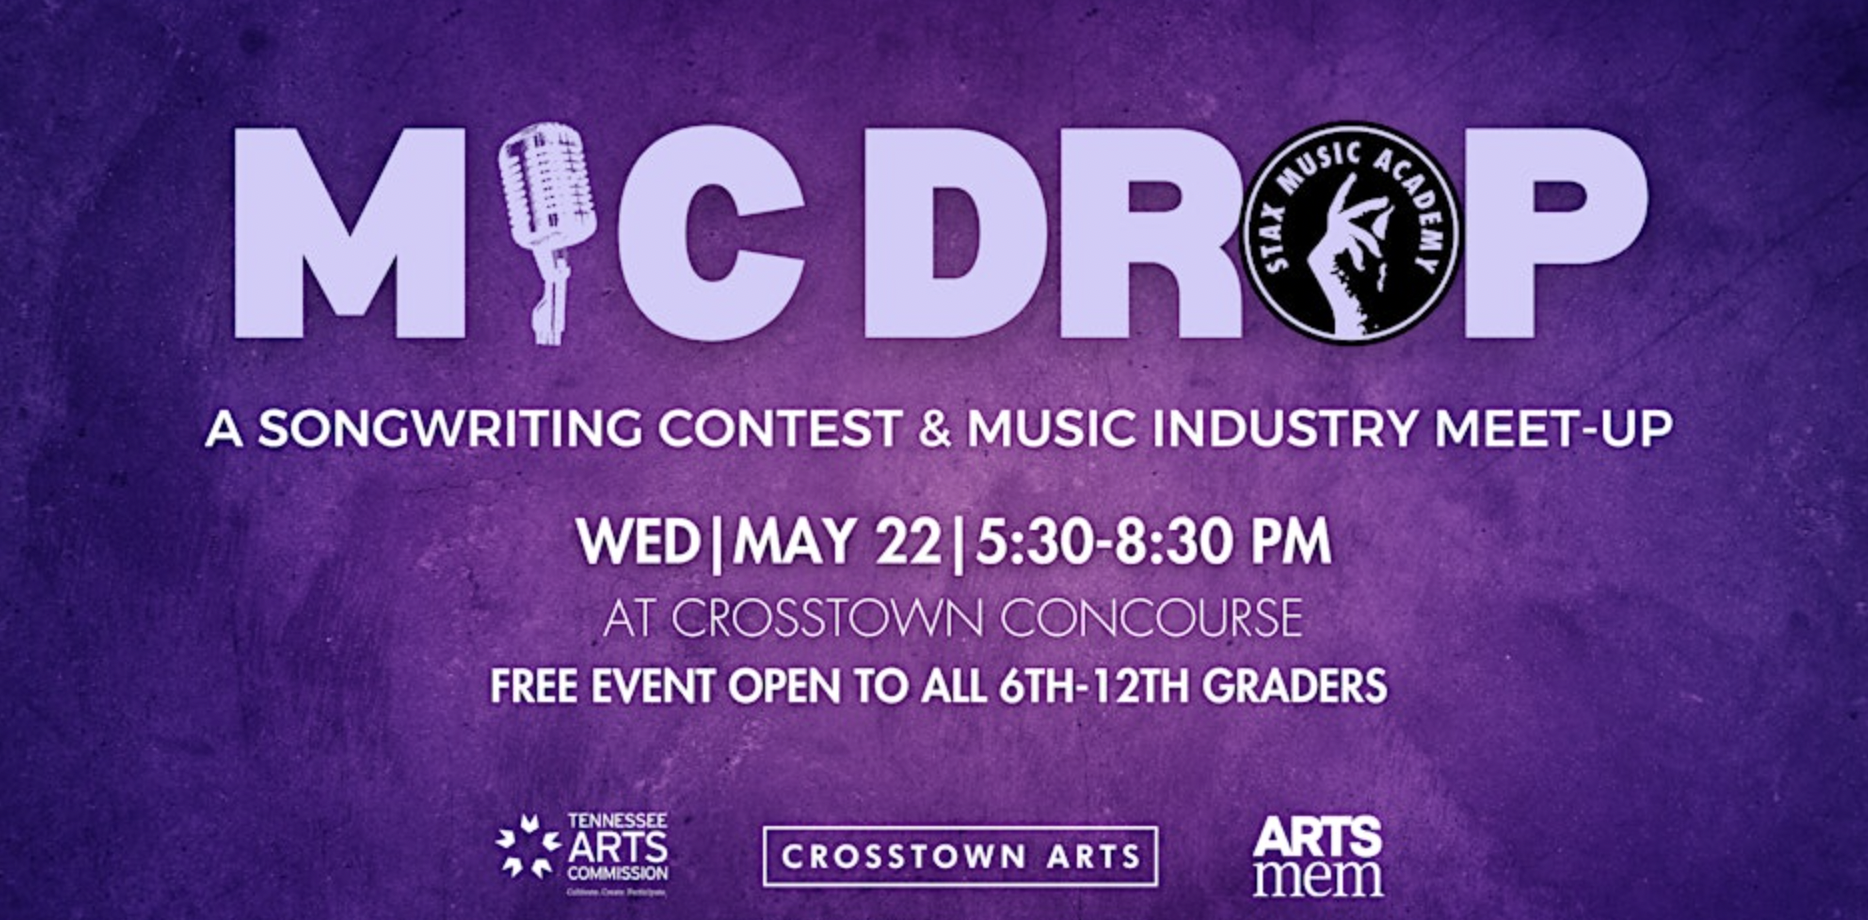 Mic Drop: A Songwriting Contest & Music Industry Meet-Up For Youth Screen Shot 2024 03 18 at 12.57.46 PM